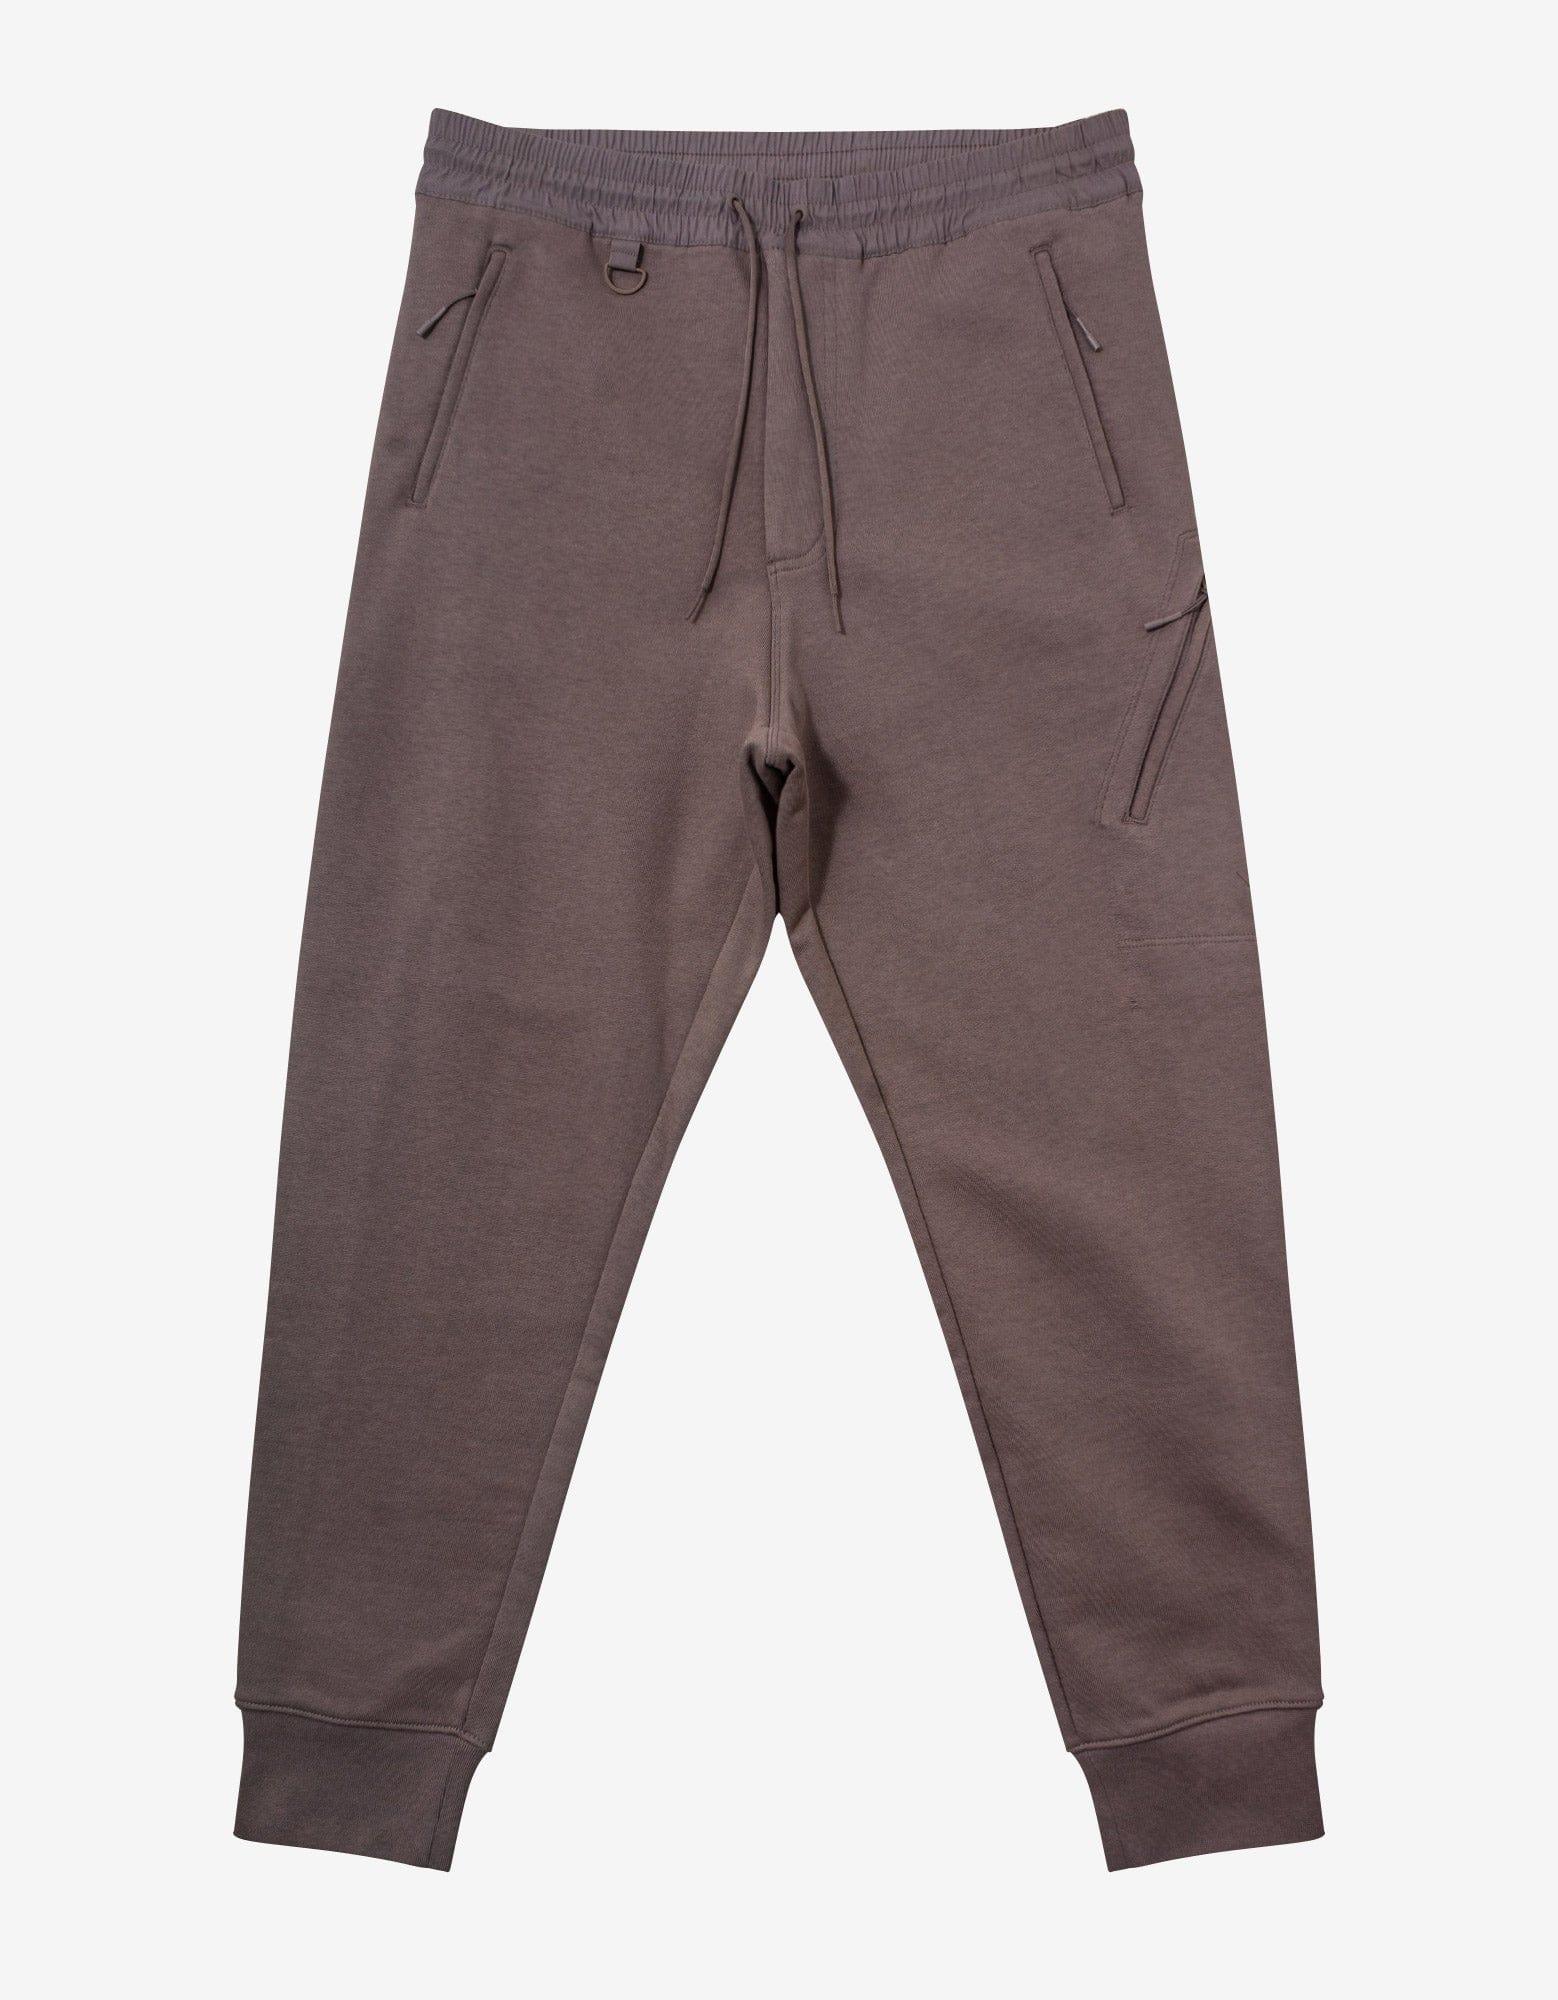 Y-3 Grey Classic Dwr Terry Utility Sweat Pants in Gray for Men | Lyst